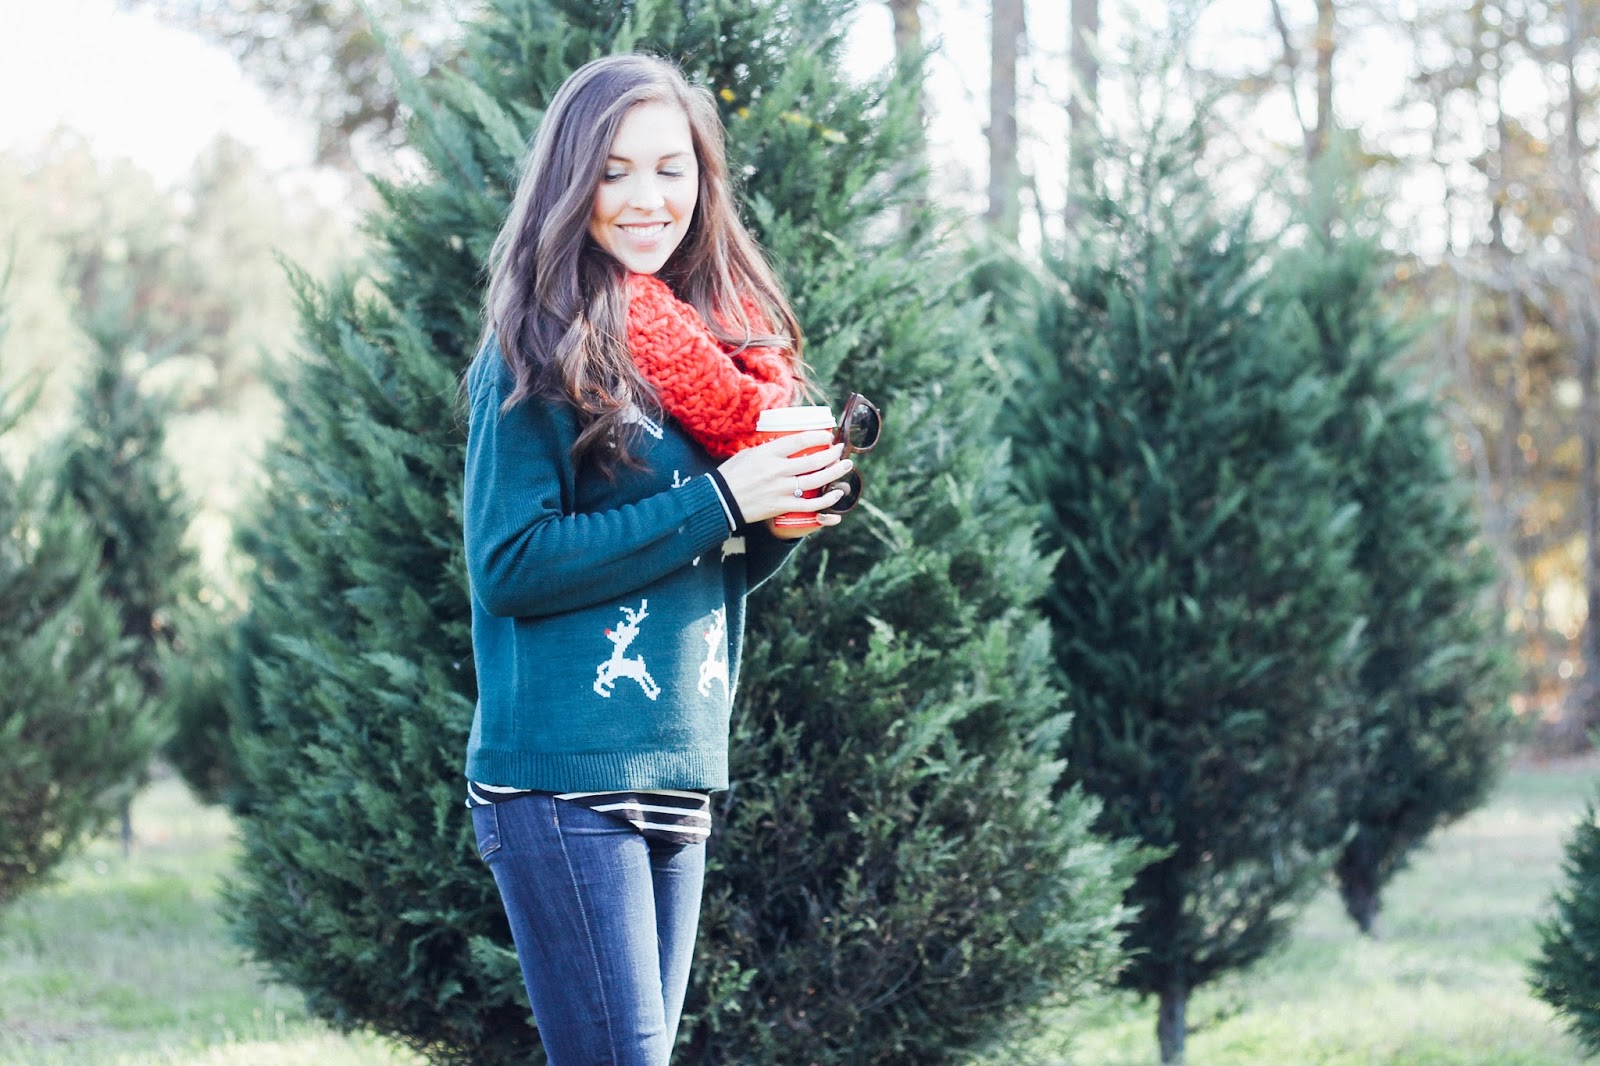 Best Black Friday Sales, Christmas Sweater, Tacky Christmas sweater, christmas sweater party, winter fashion, winter style, holiday sales, Nordstrom Black Friday Sale, Pretty in the Pines Blog, Fashion Blogger, North Carolina Fashion Blog